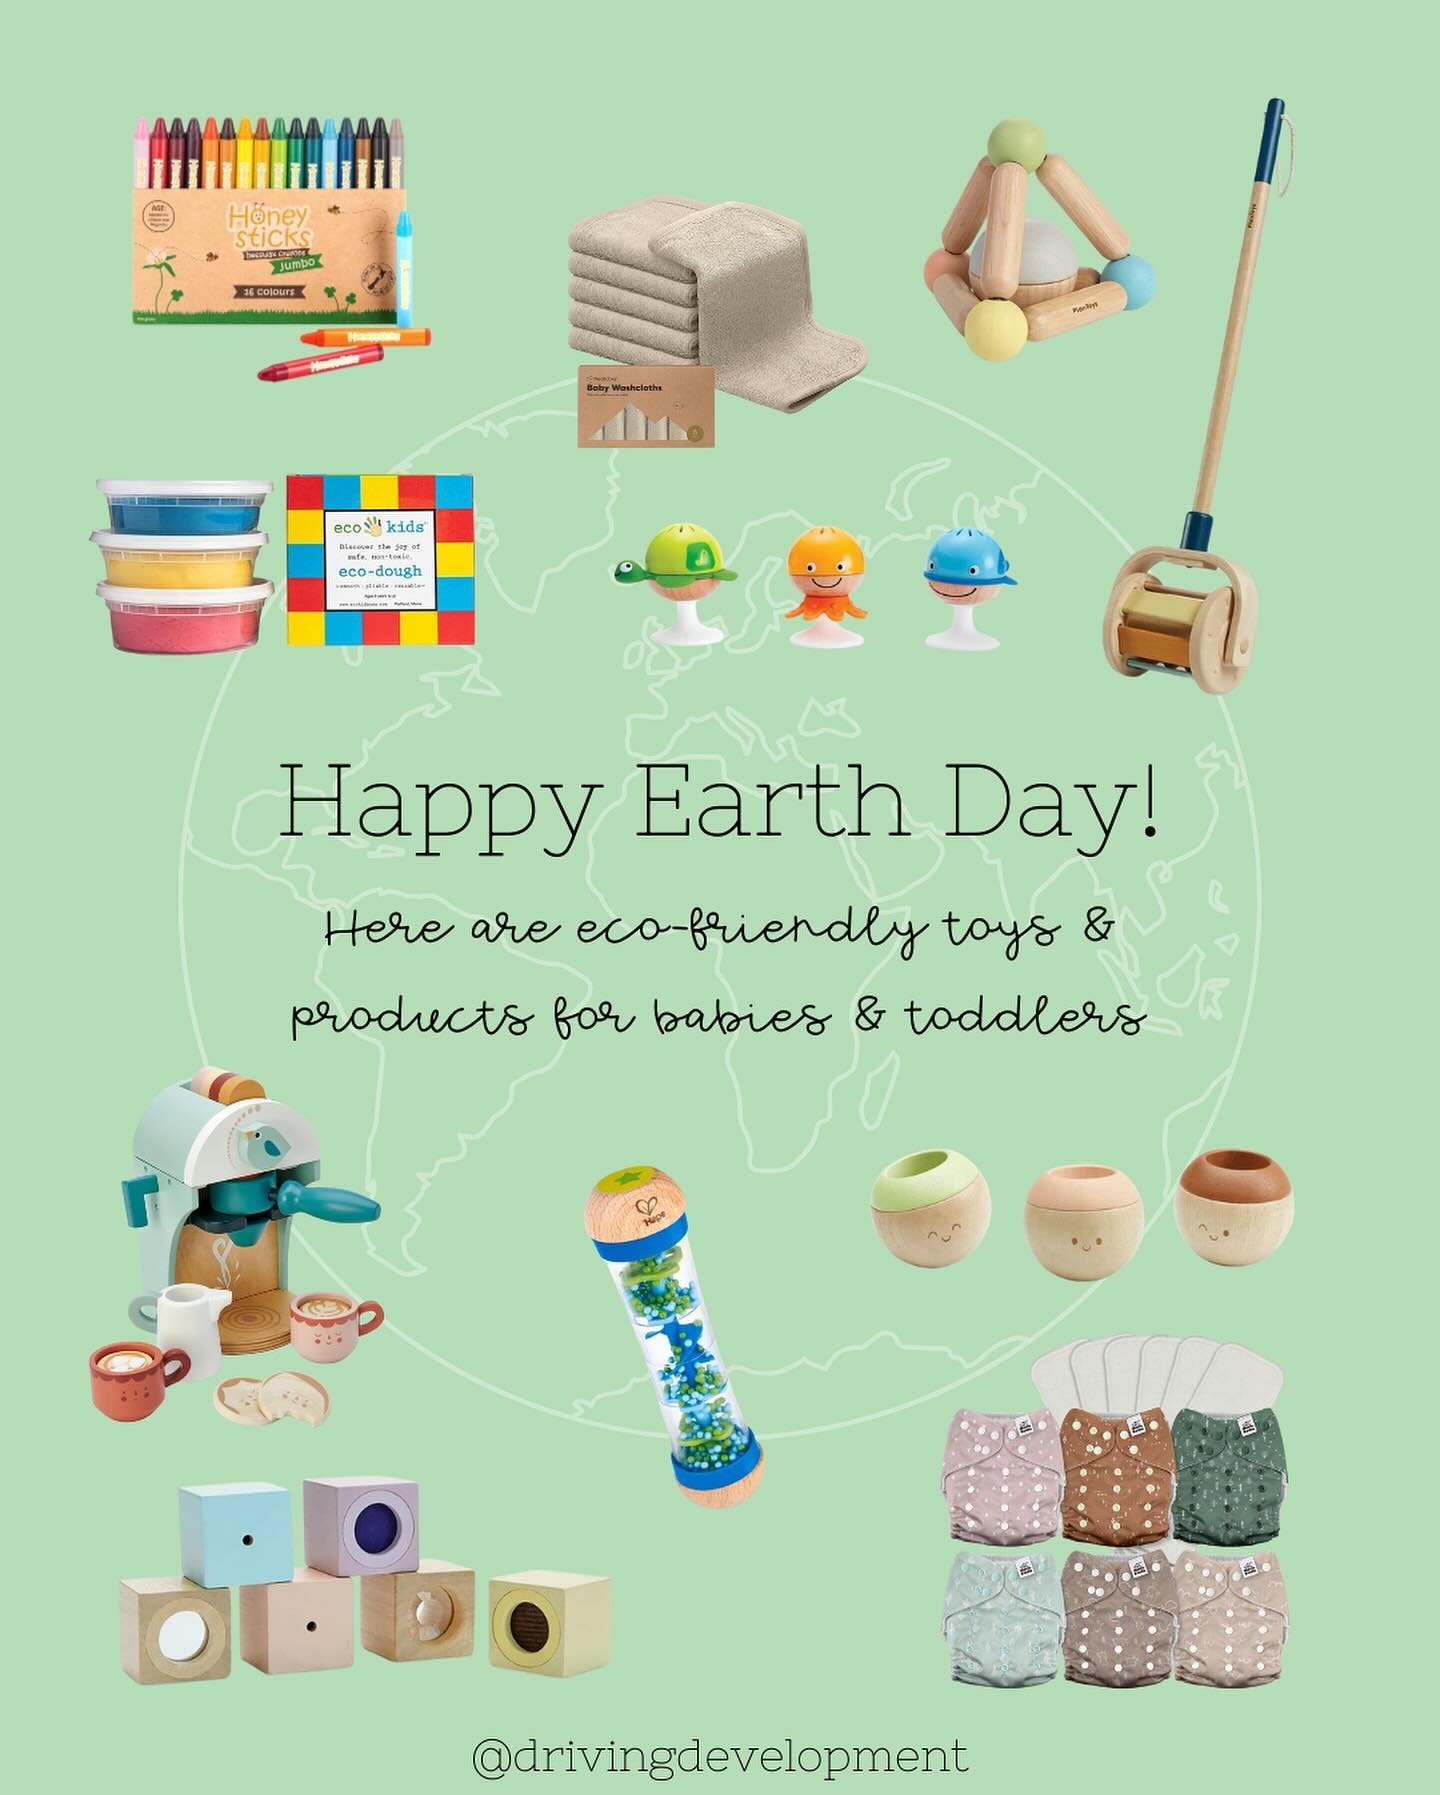 Happy Earth Day! 🌍🌱 Celebrate Earth Day every day with some of our favorite earth-friendly toys and products for babies &amp; toddlers! 

Here are some other ways to reduce, reuse and recycle:
-Set up a local toy exchange twice a year and rotate to